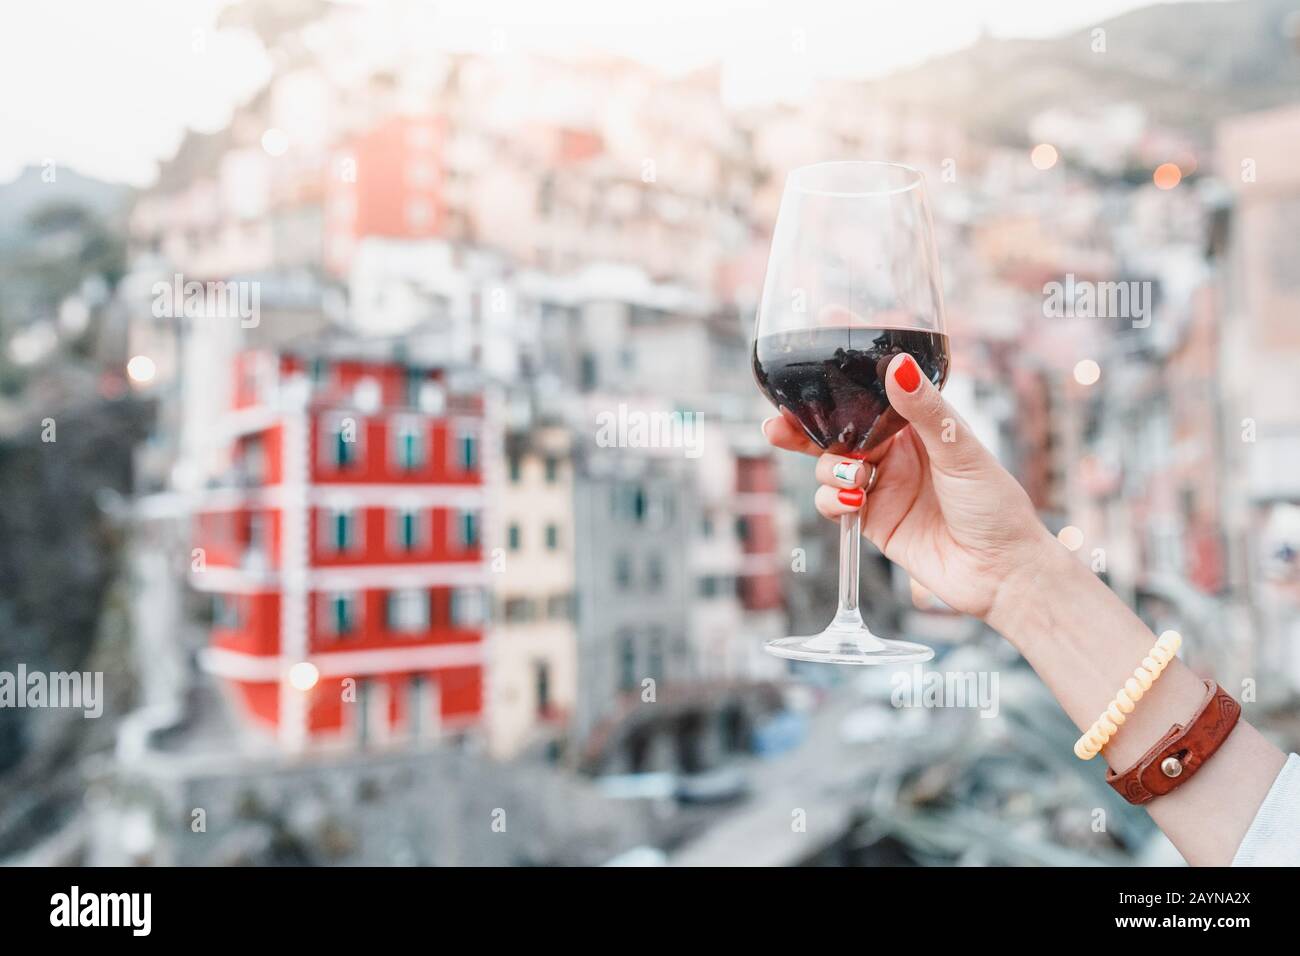 Female hand with italian flag nail art holding glass with red wine on a background of cinque terre riomaggiore town Stock Photo